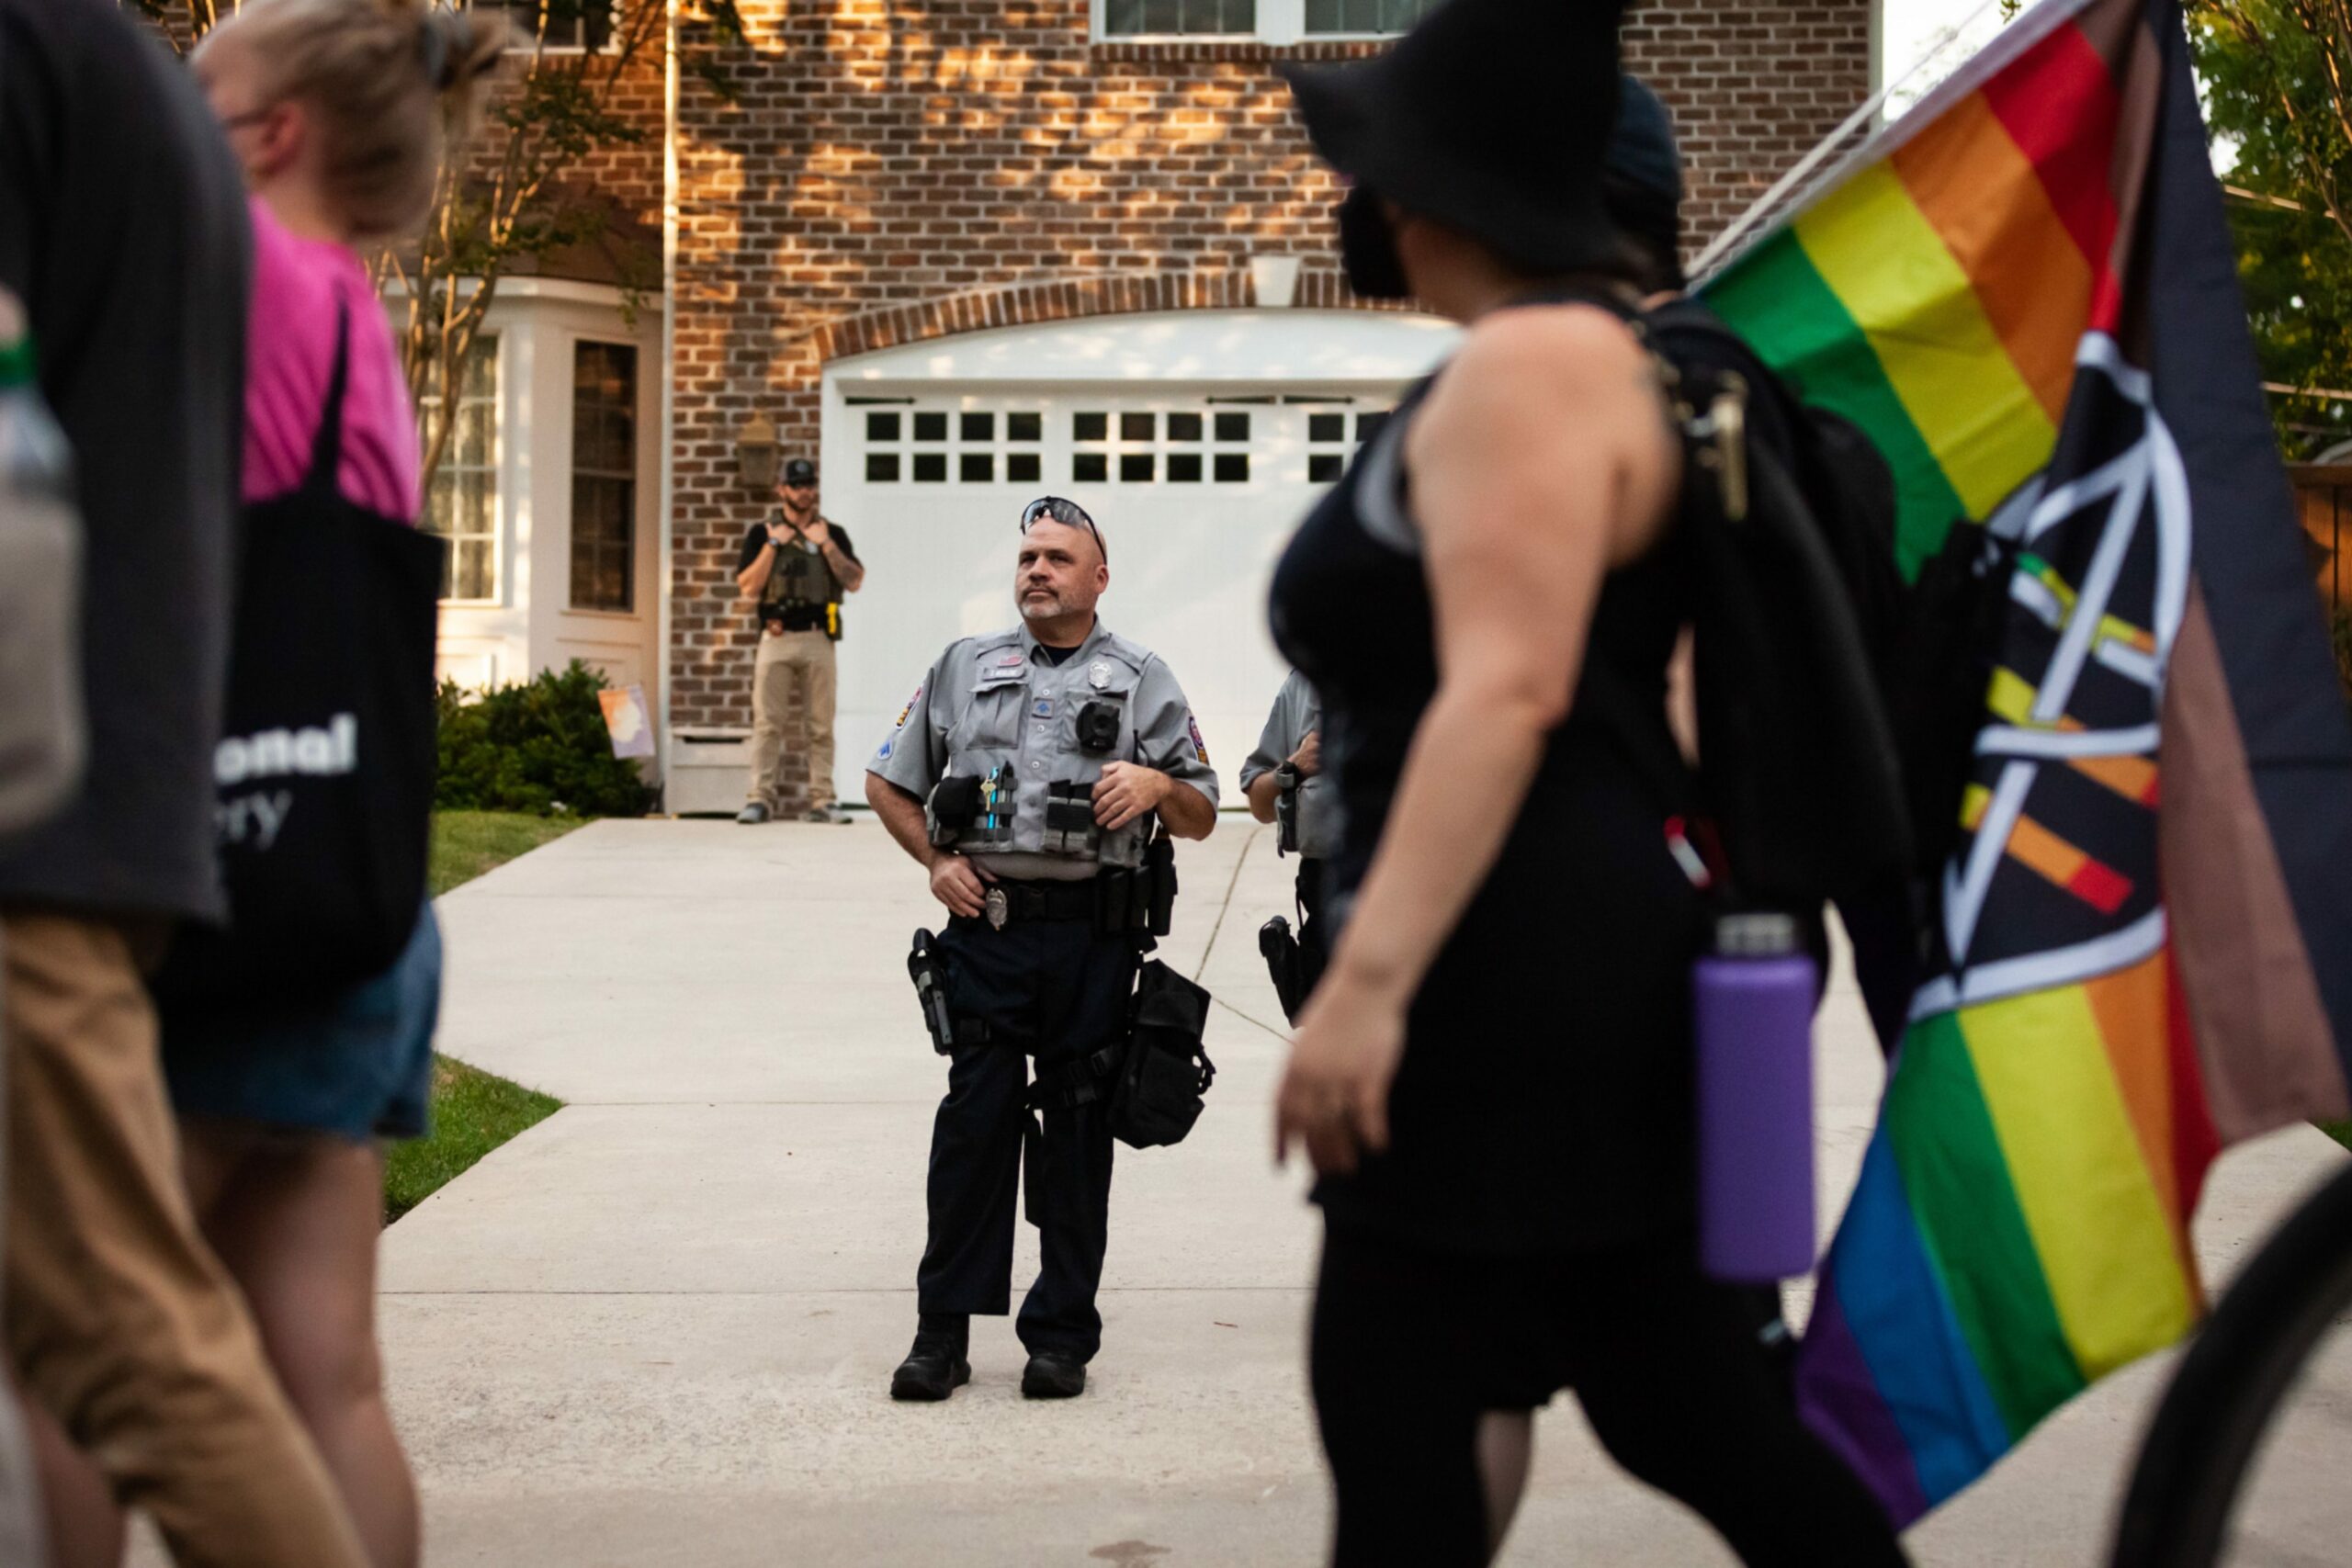 A Fairfax County Police officer watches as pro-choice protesters walk past Supreme Court Justice Samuel Alito's house in Alexandria, VA. Photo by Allison Bailey/NurPhoto/Shutterstock (13008122j)